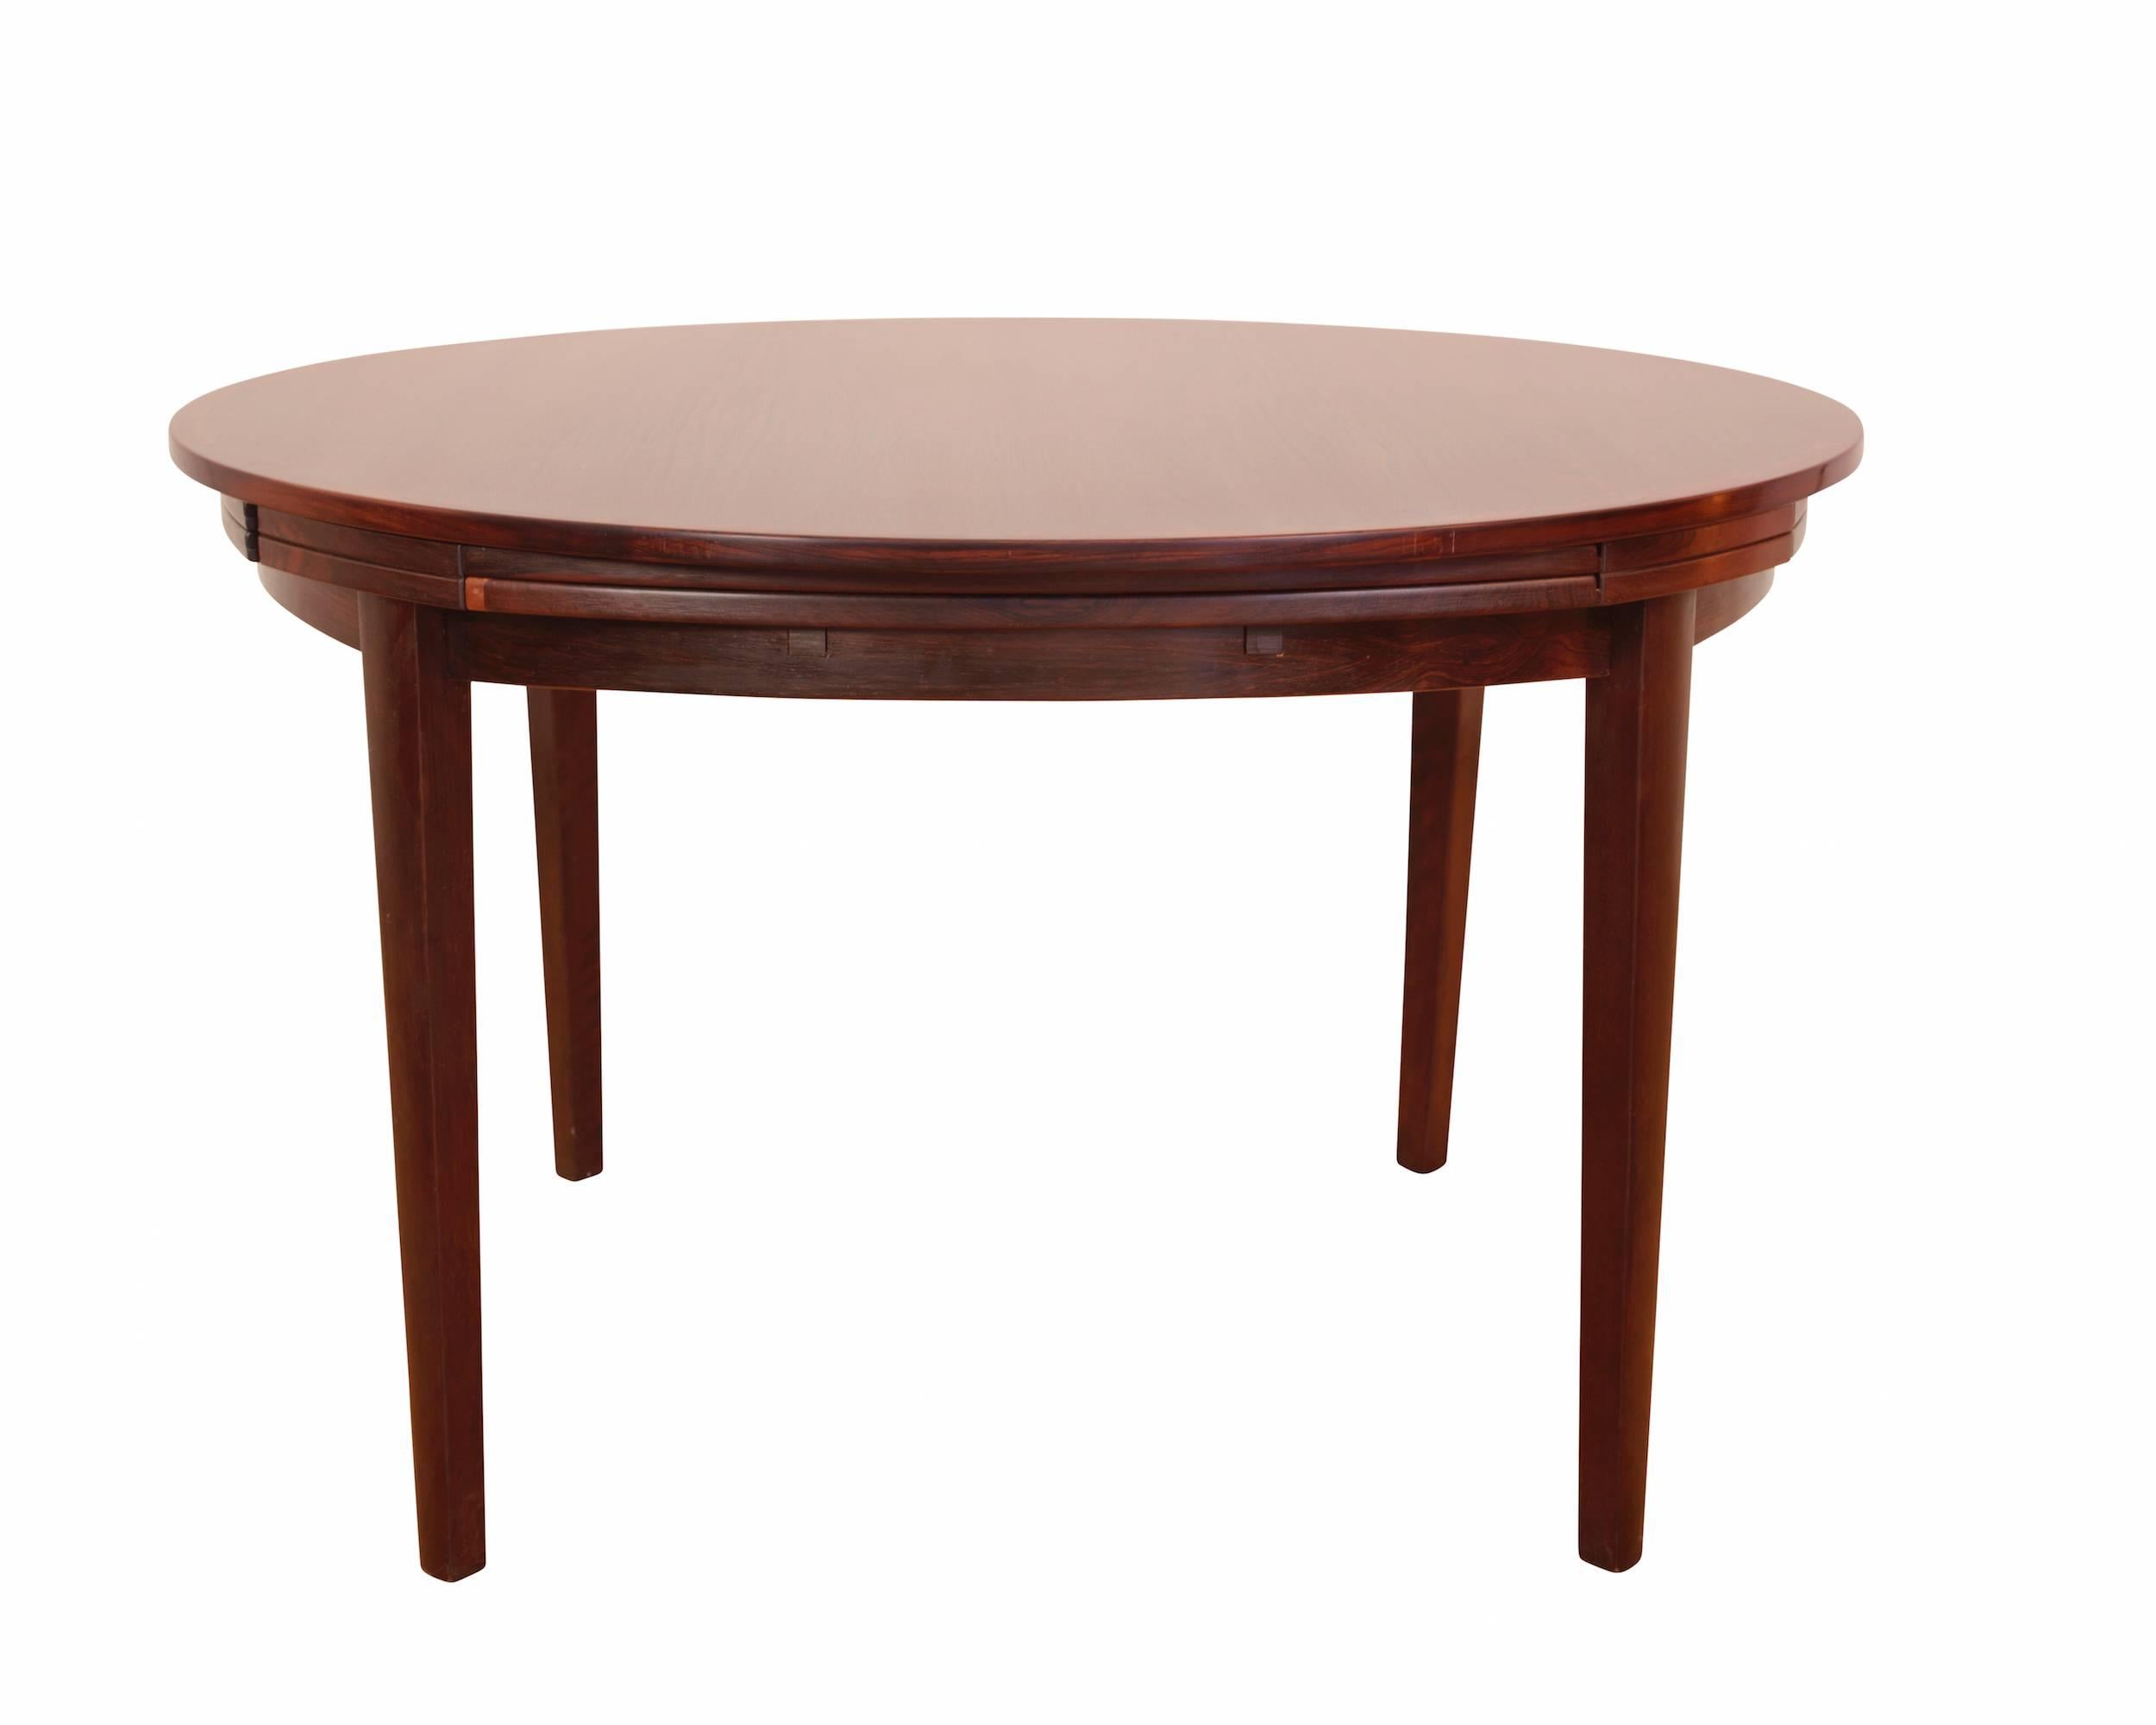 Round rosewood dining room table with pull-out leaves, raised on for legs.
Designed and manufactured by Svend Dyrlund. 

Measurements taken when closed.